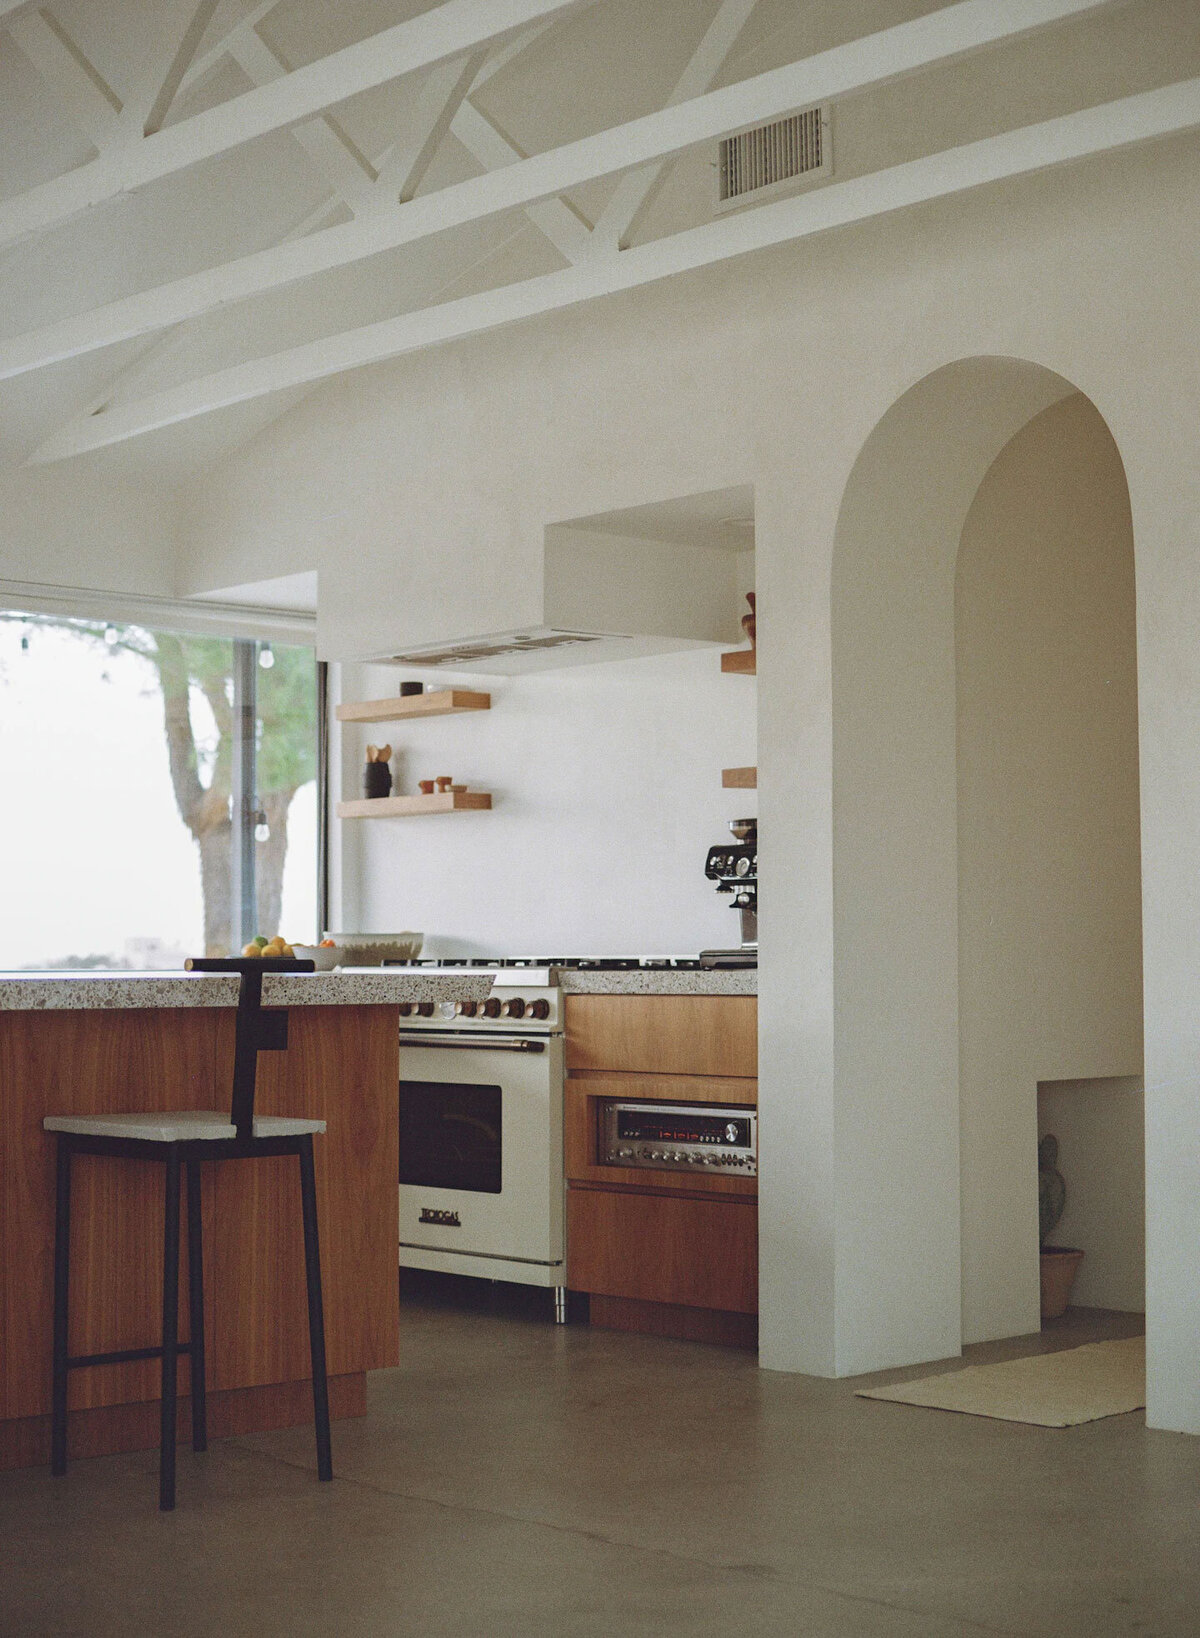 le-chacuel-airbnb-kitchen